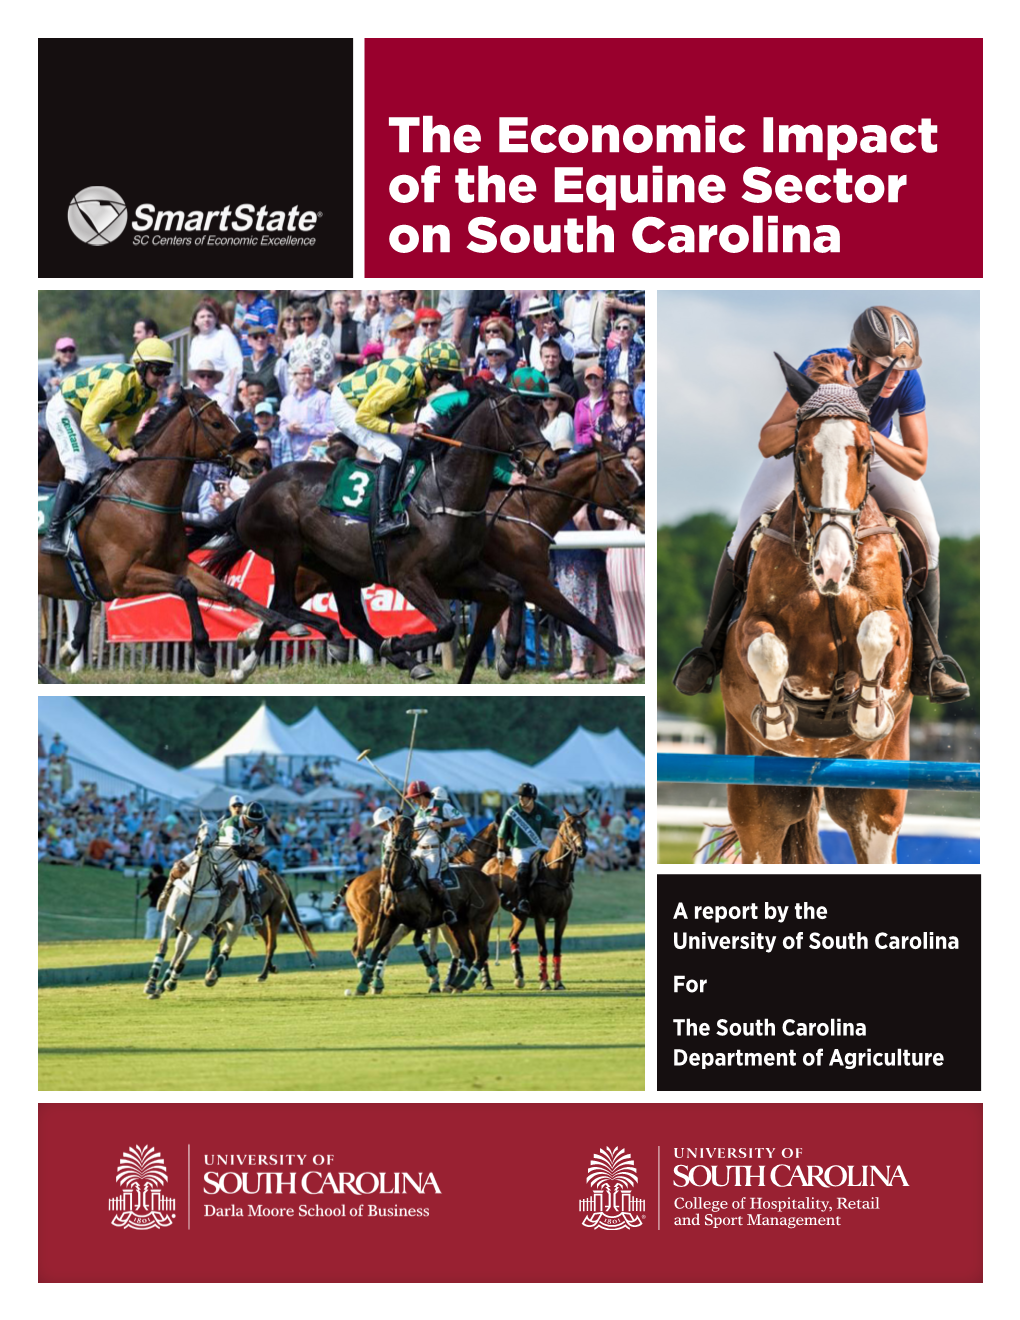 The Economic Impact of the Equine Sector on South Carolina